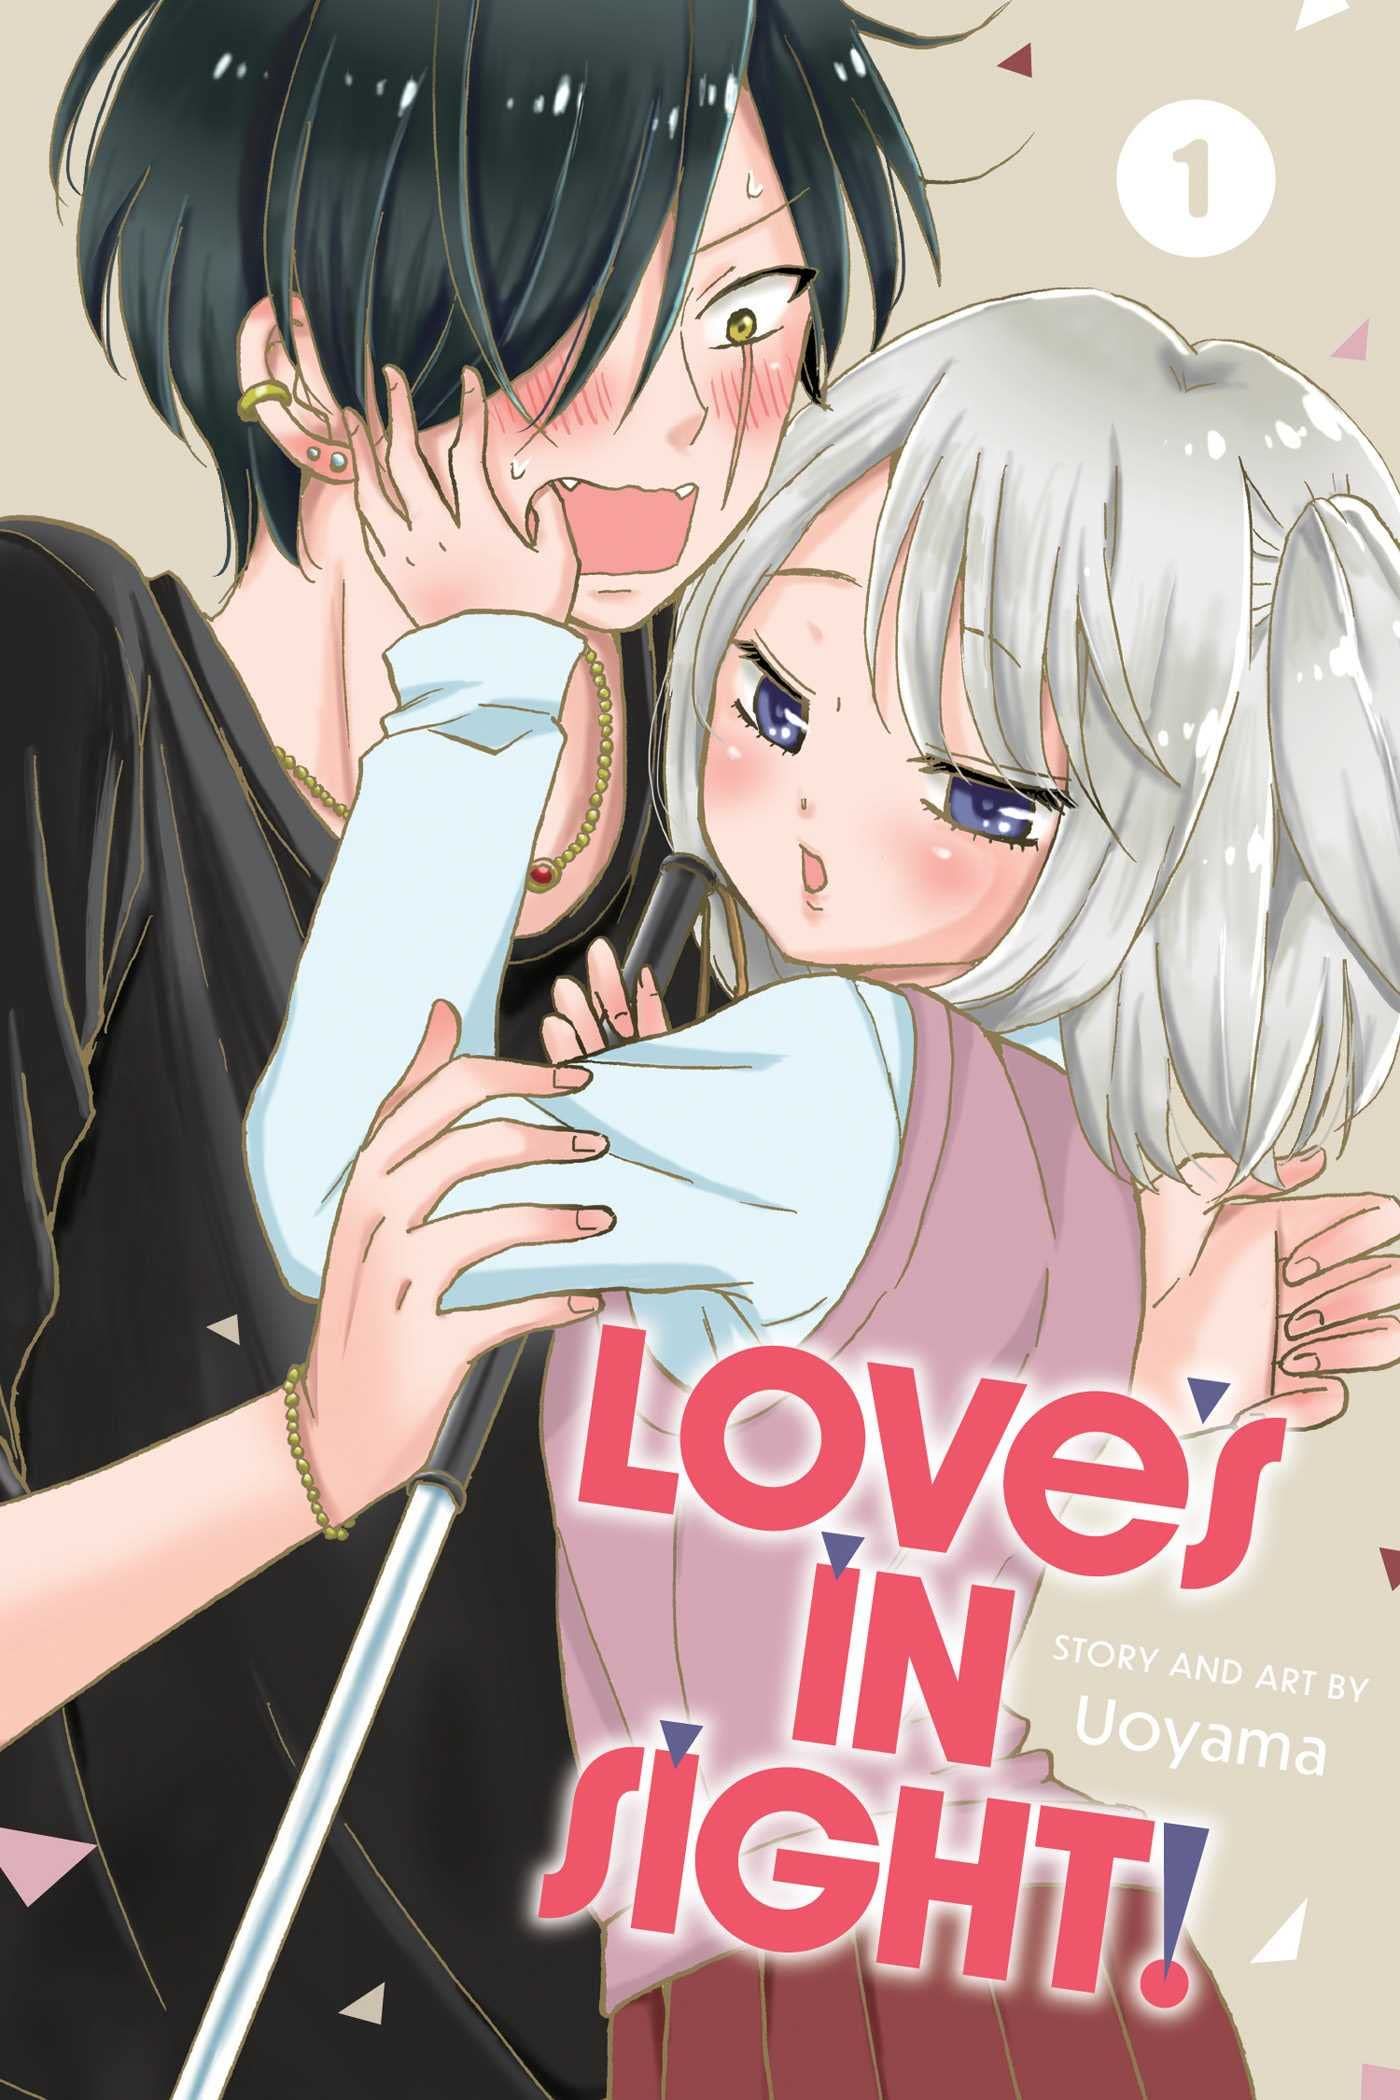 Love's in Sight! by Uoyama cover